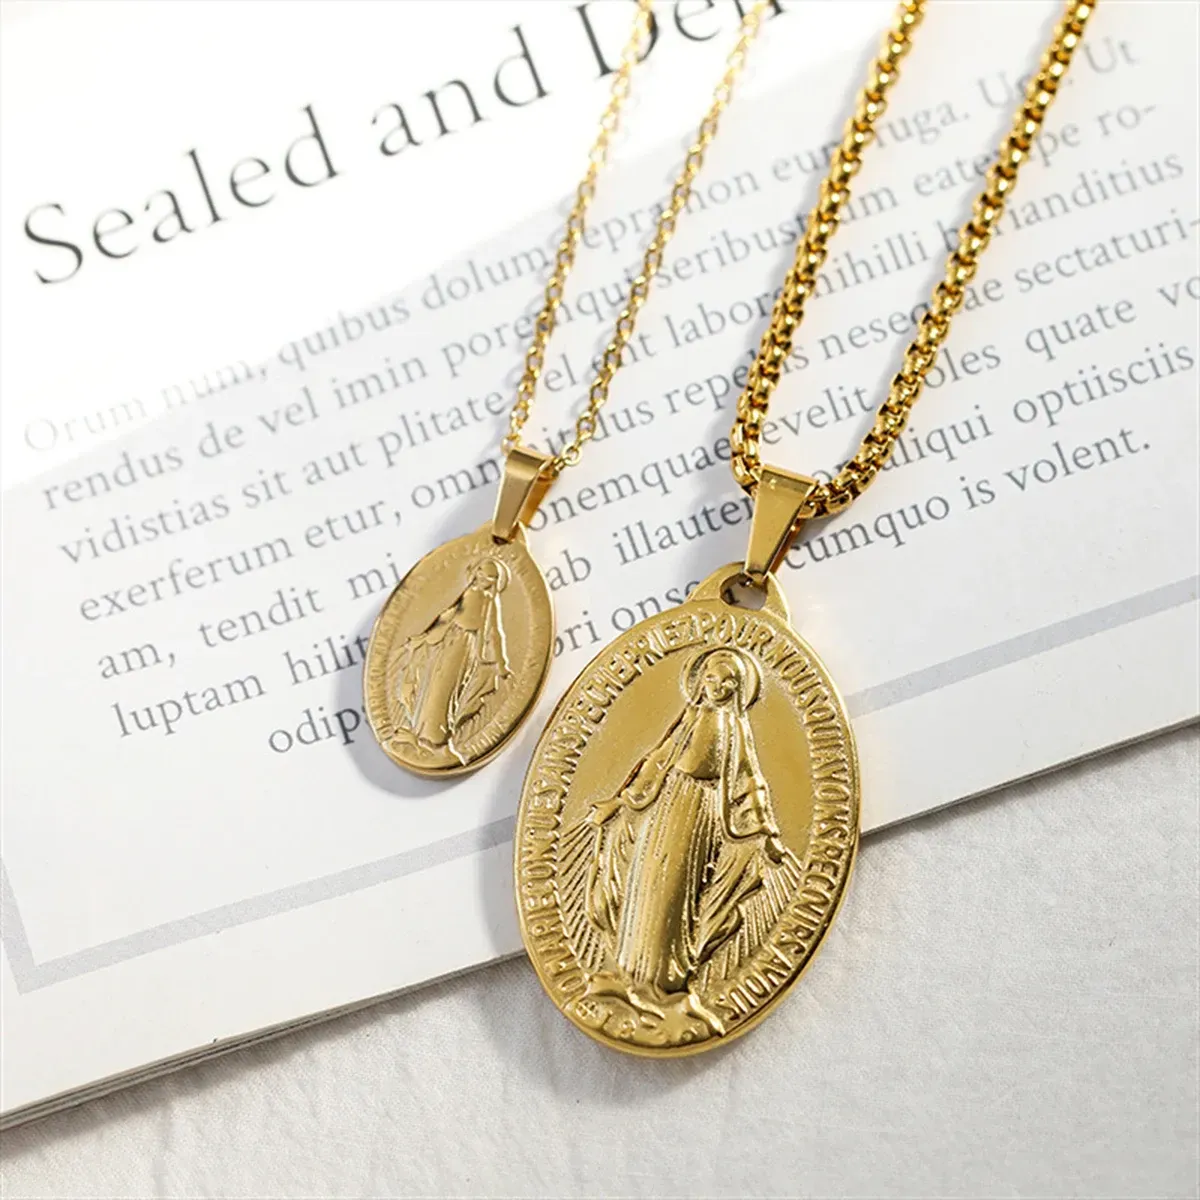 Necklaces Pendant Necklaces Catholic Virgin Mary Our Lady Miraculous Medal Charm 14k Yellow Gold Oval Only Pendant for Necklace Jewelry Maki